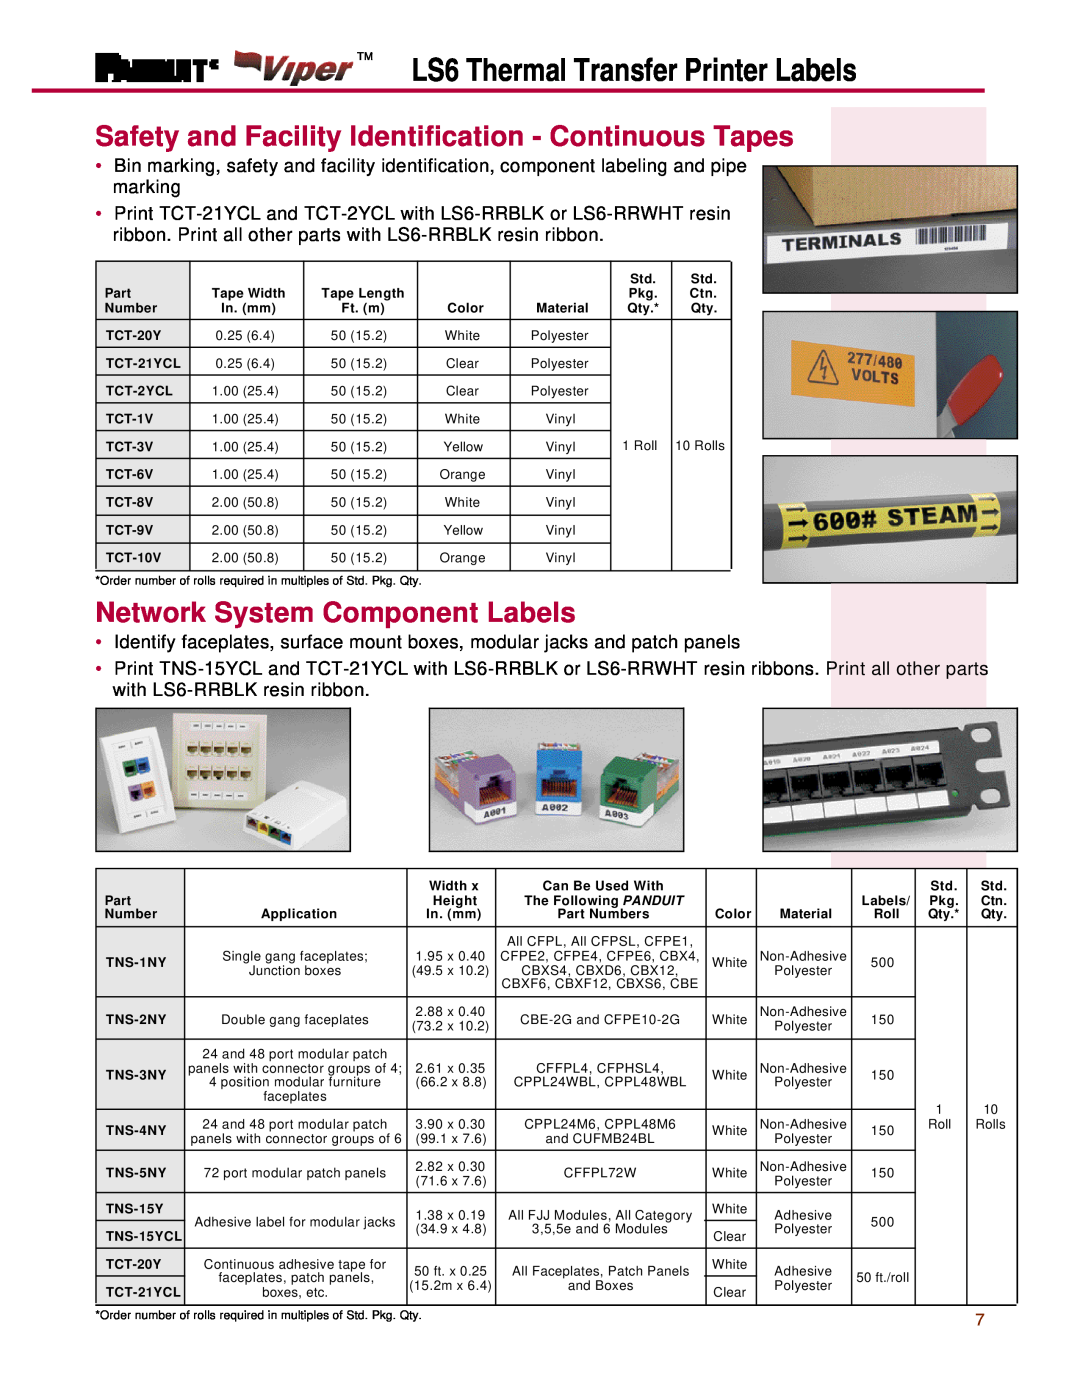 Panduit LS6 manual Safety and Facility Identification - Continuous Tapes, Network System Component Labels 